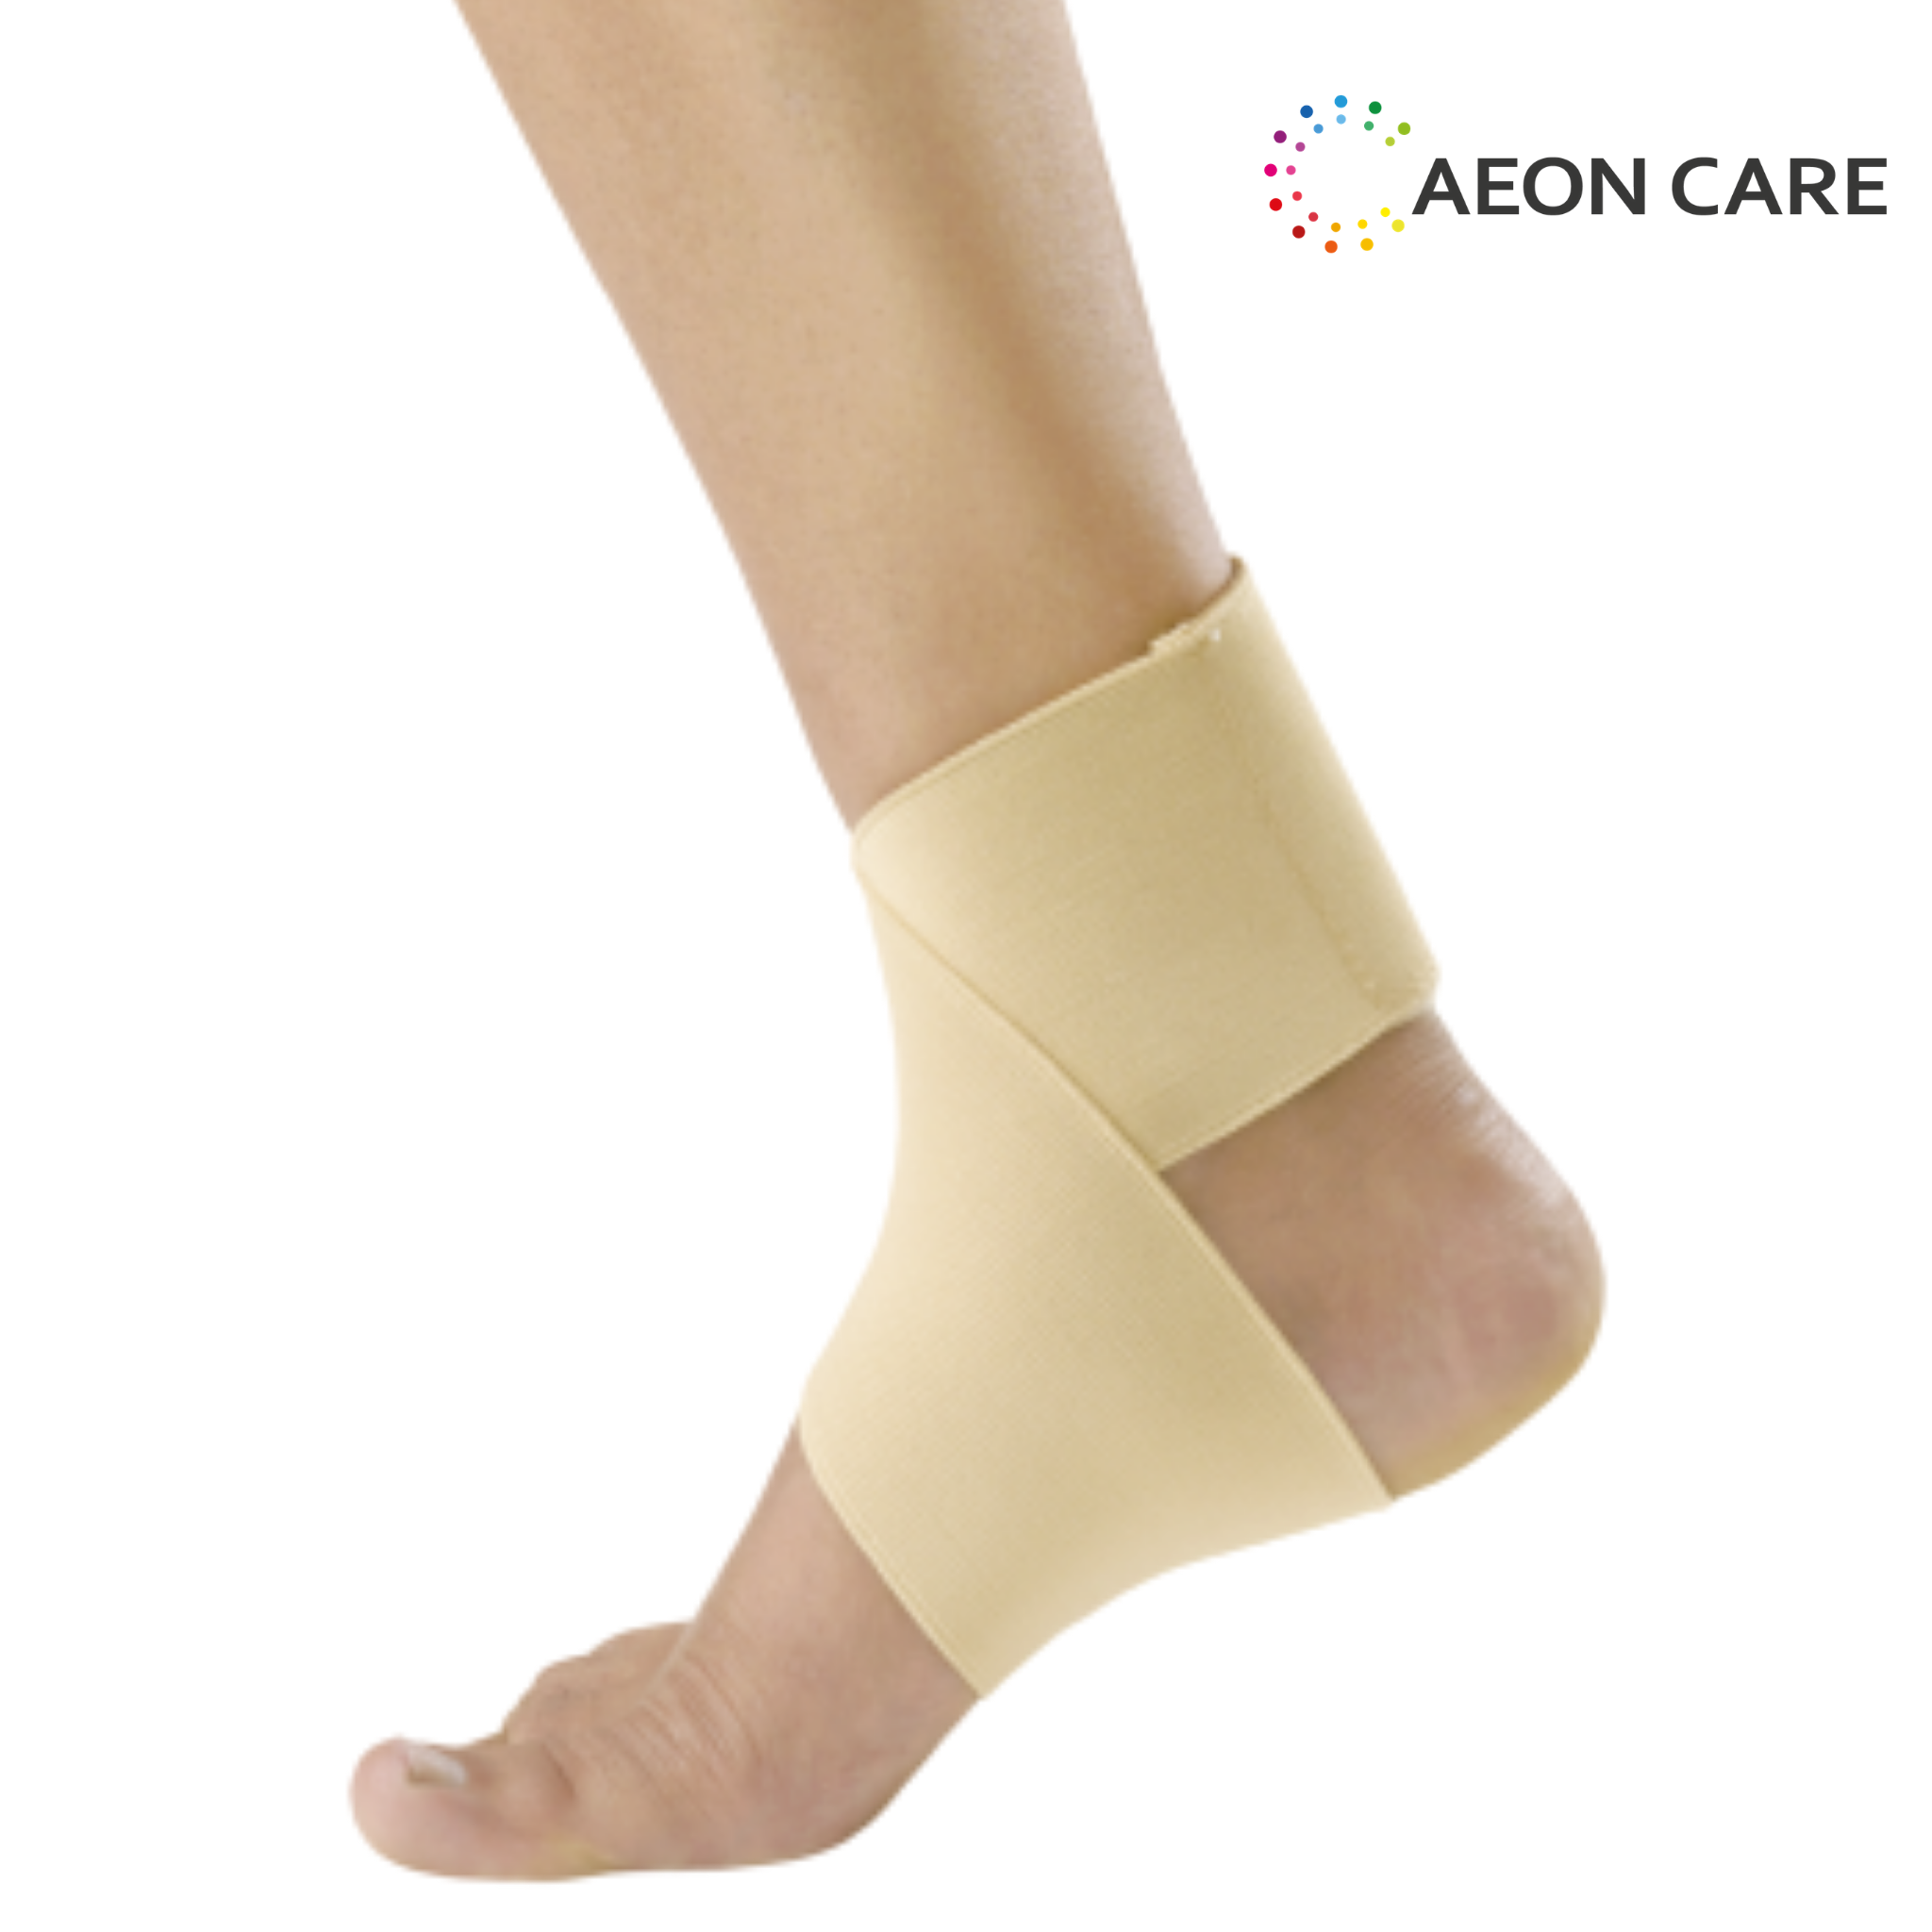 Sego Ankle Brace is available at best price in AeonCare Chennai.